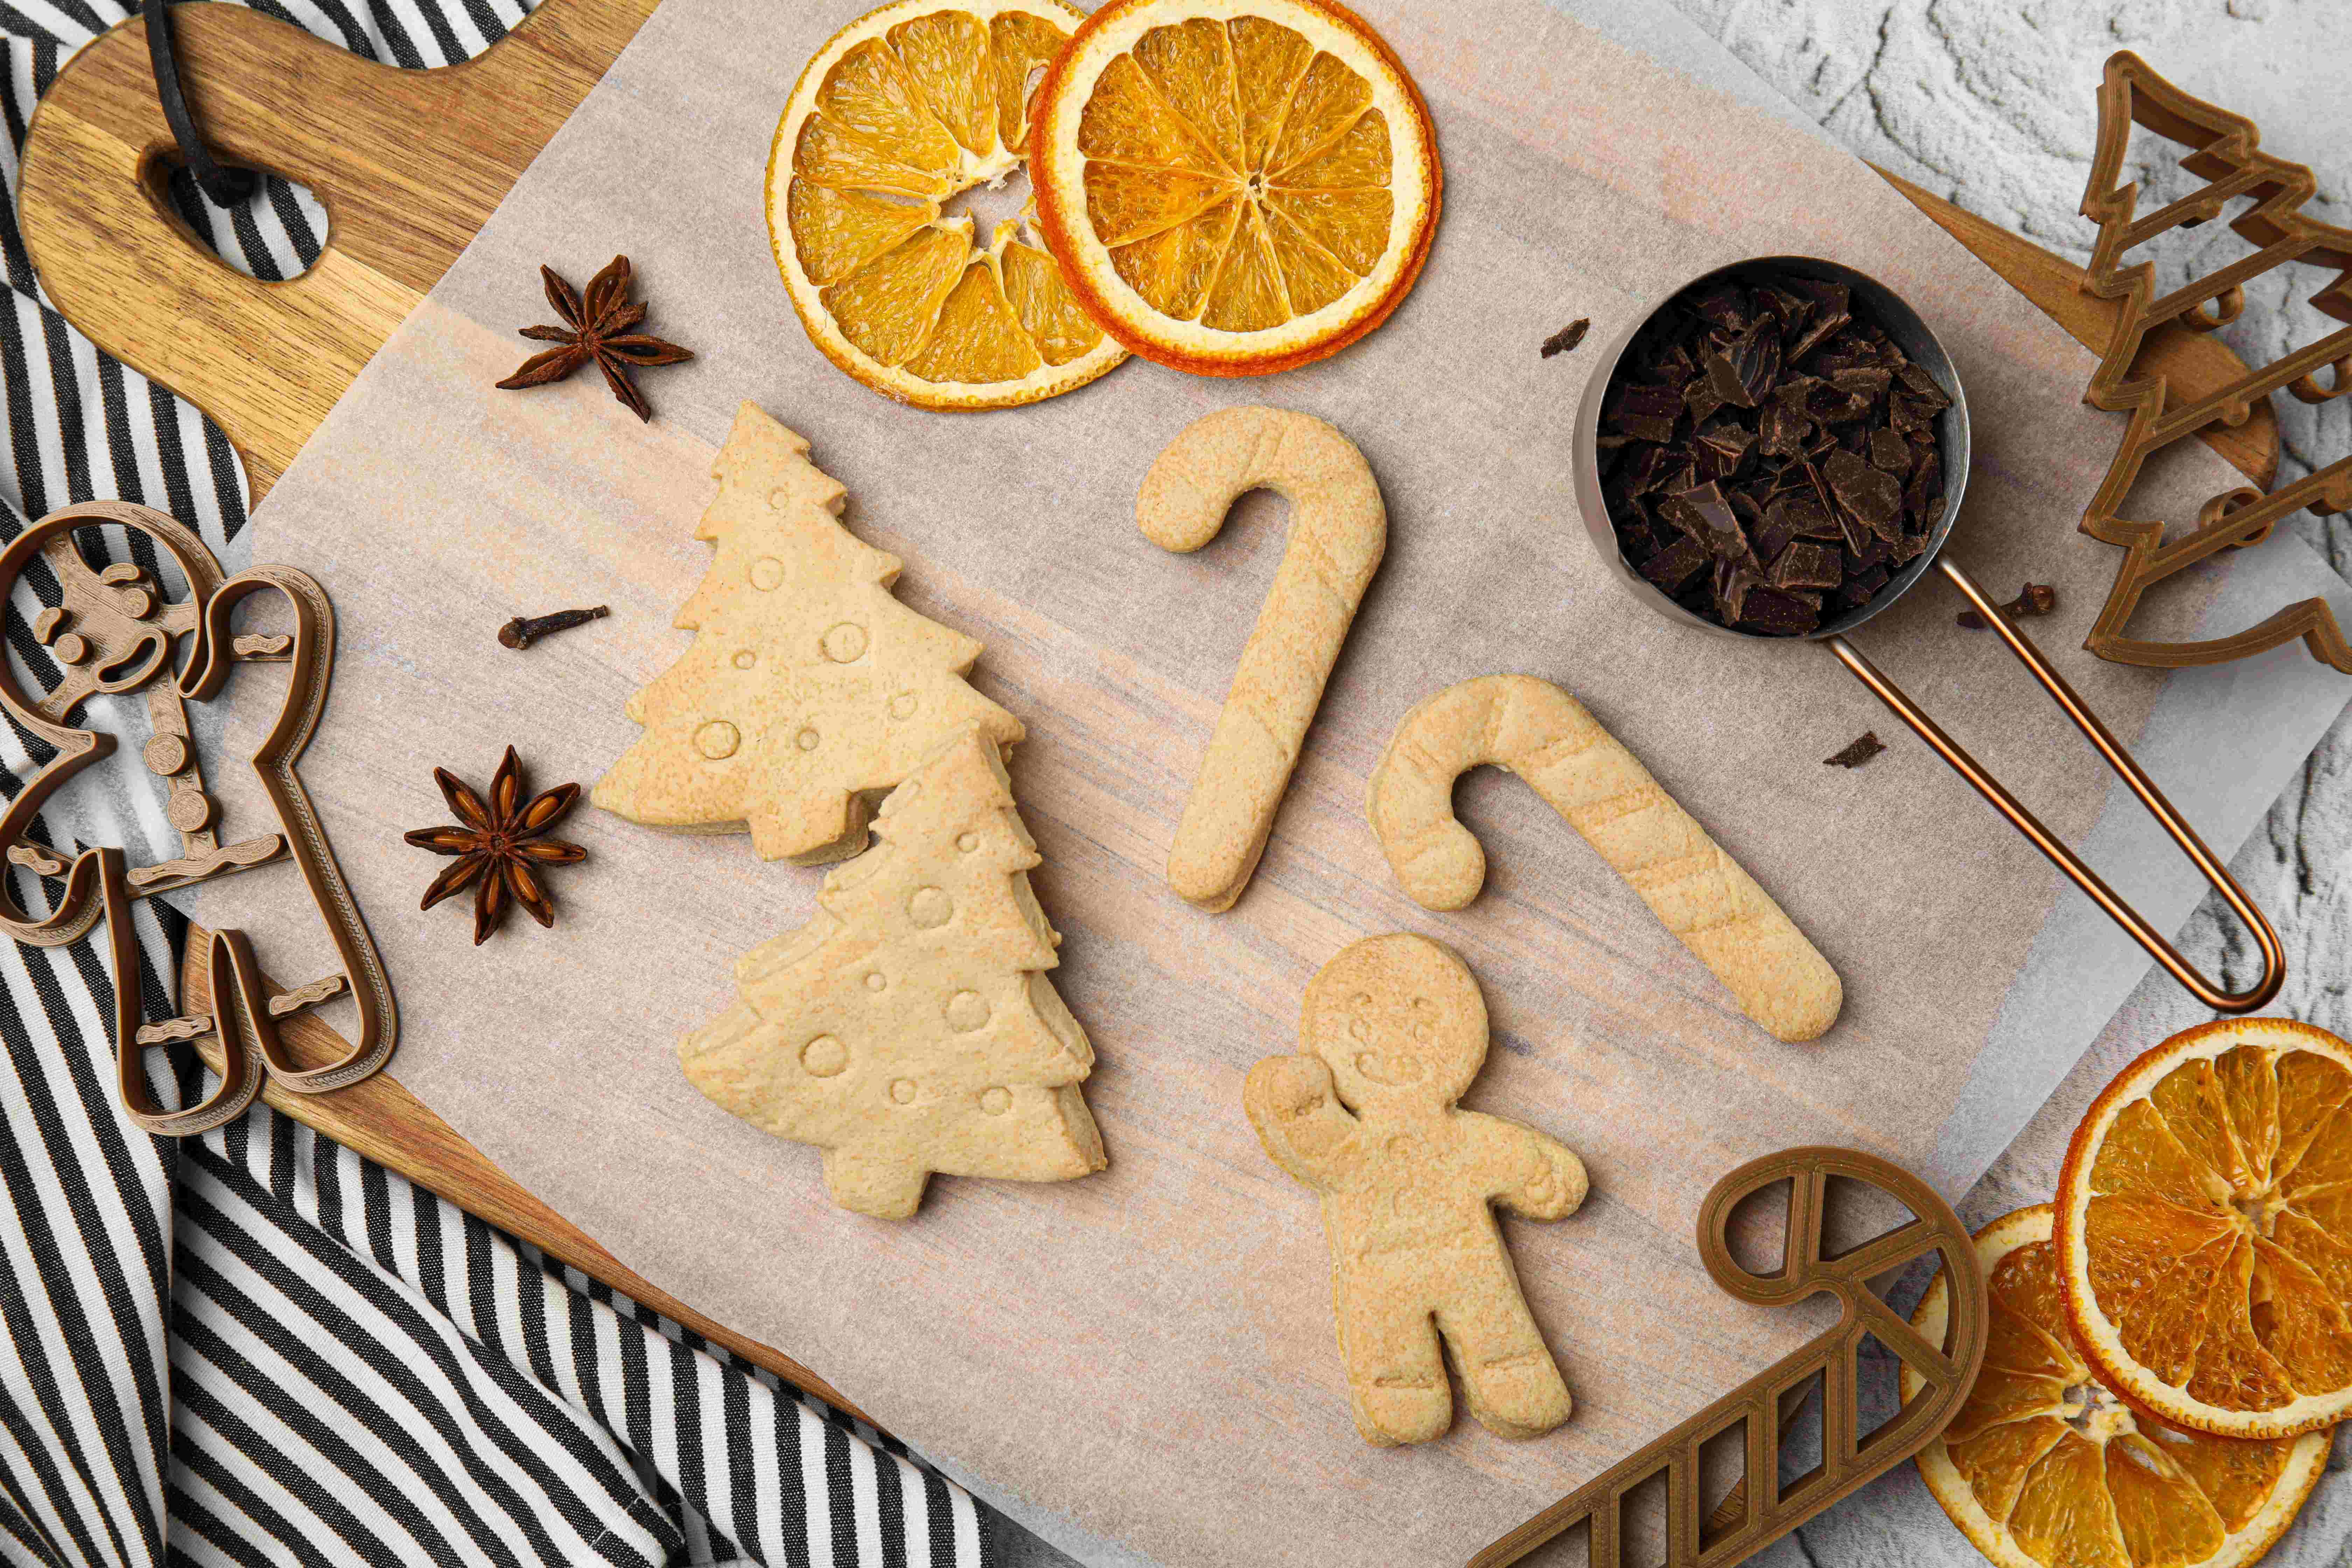 Cookie dough cut into festive shapes with holiday-themed cookie cutters